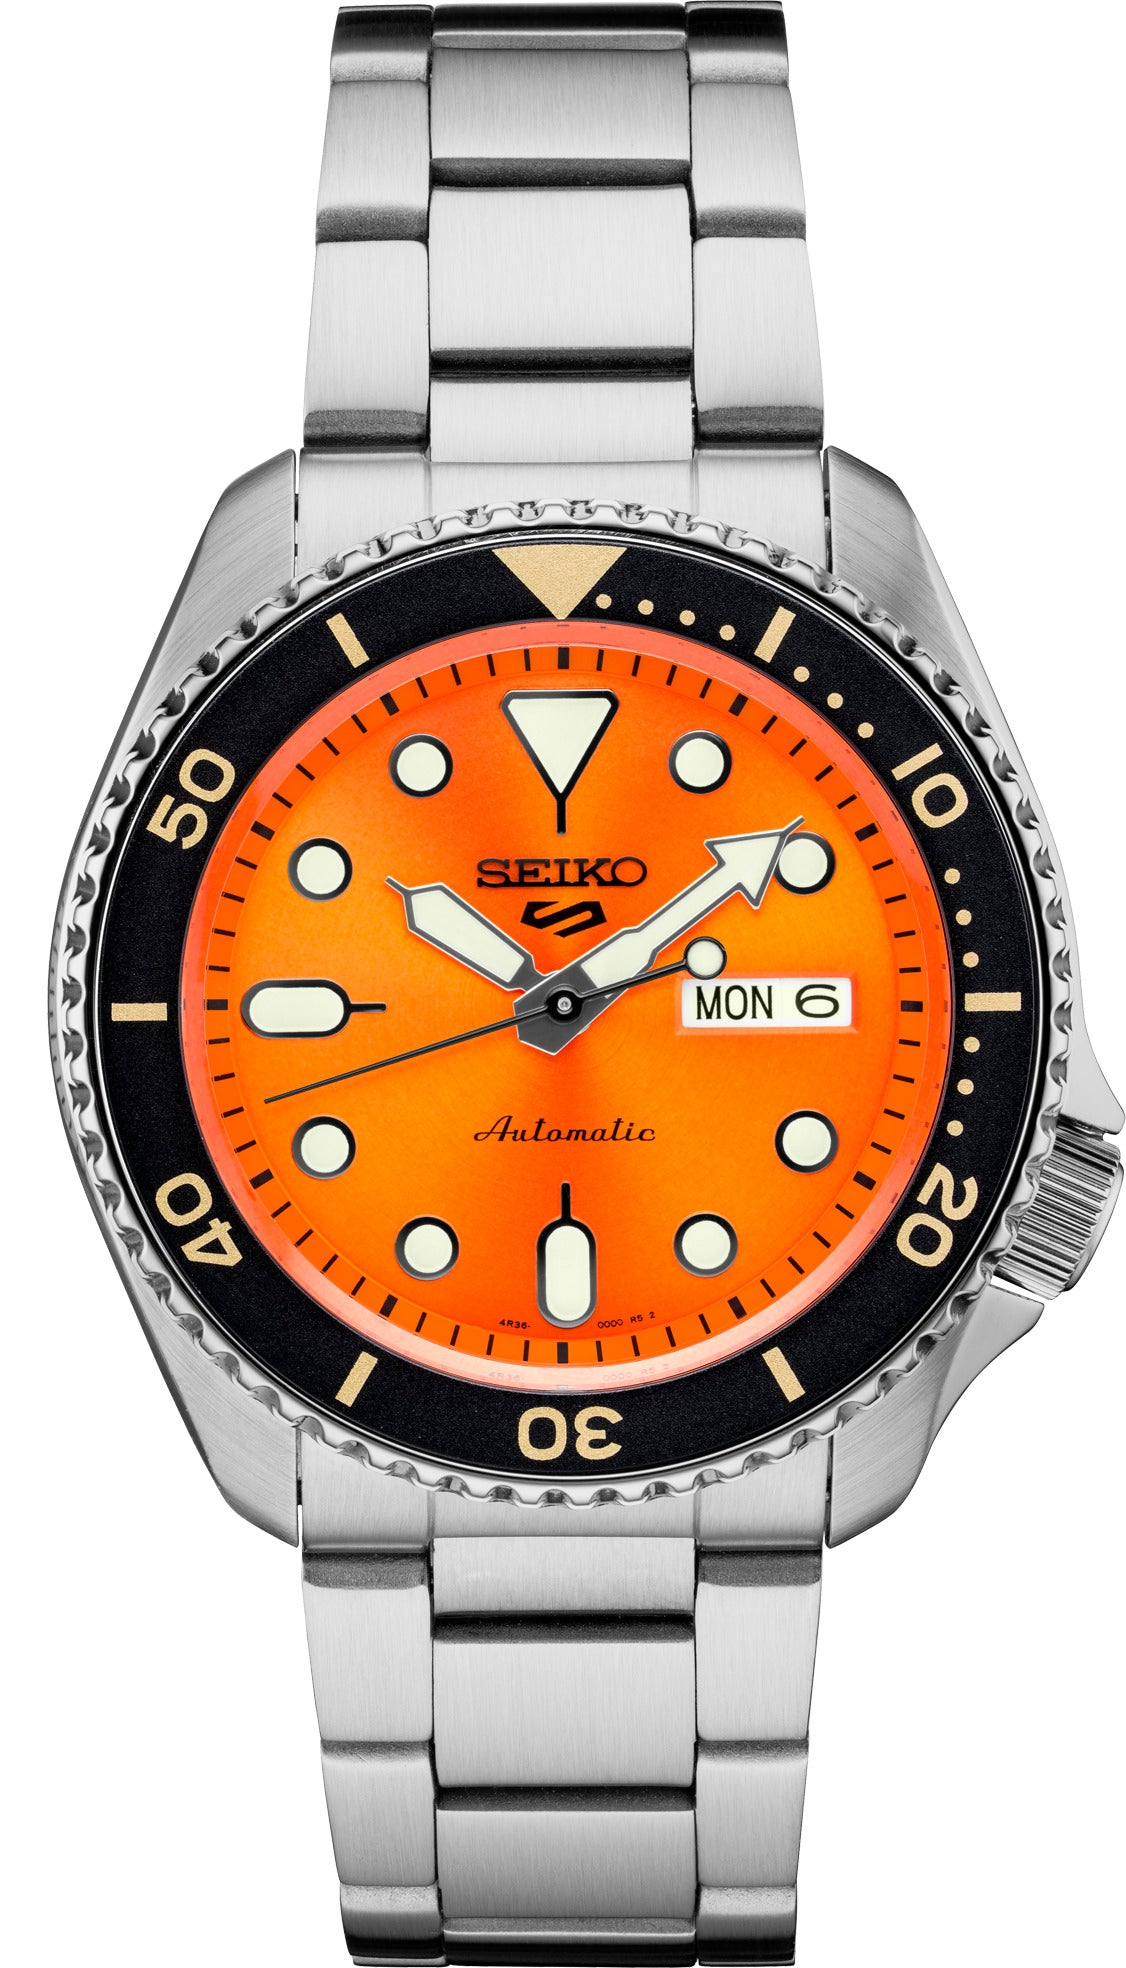 Seiko 5 Sports Men's Stainless Watch in color Silver-Tone, orange from the front view